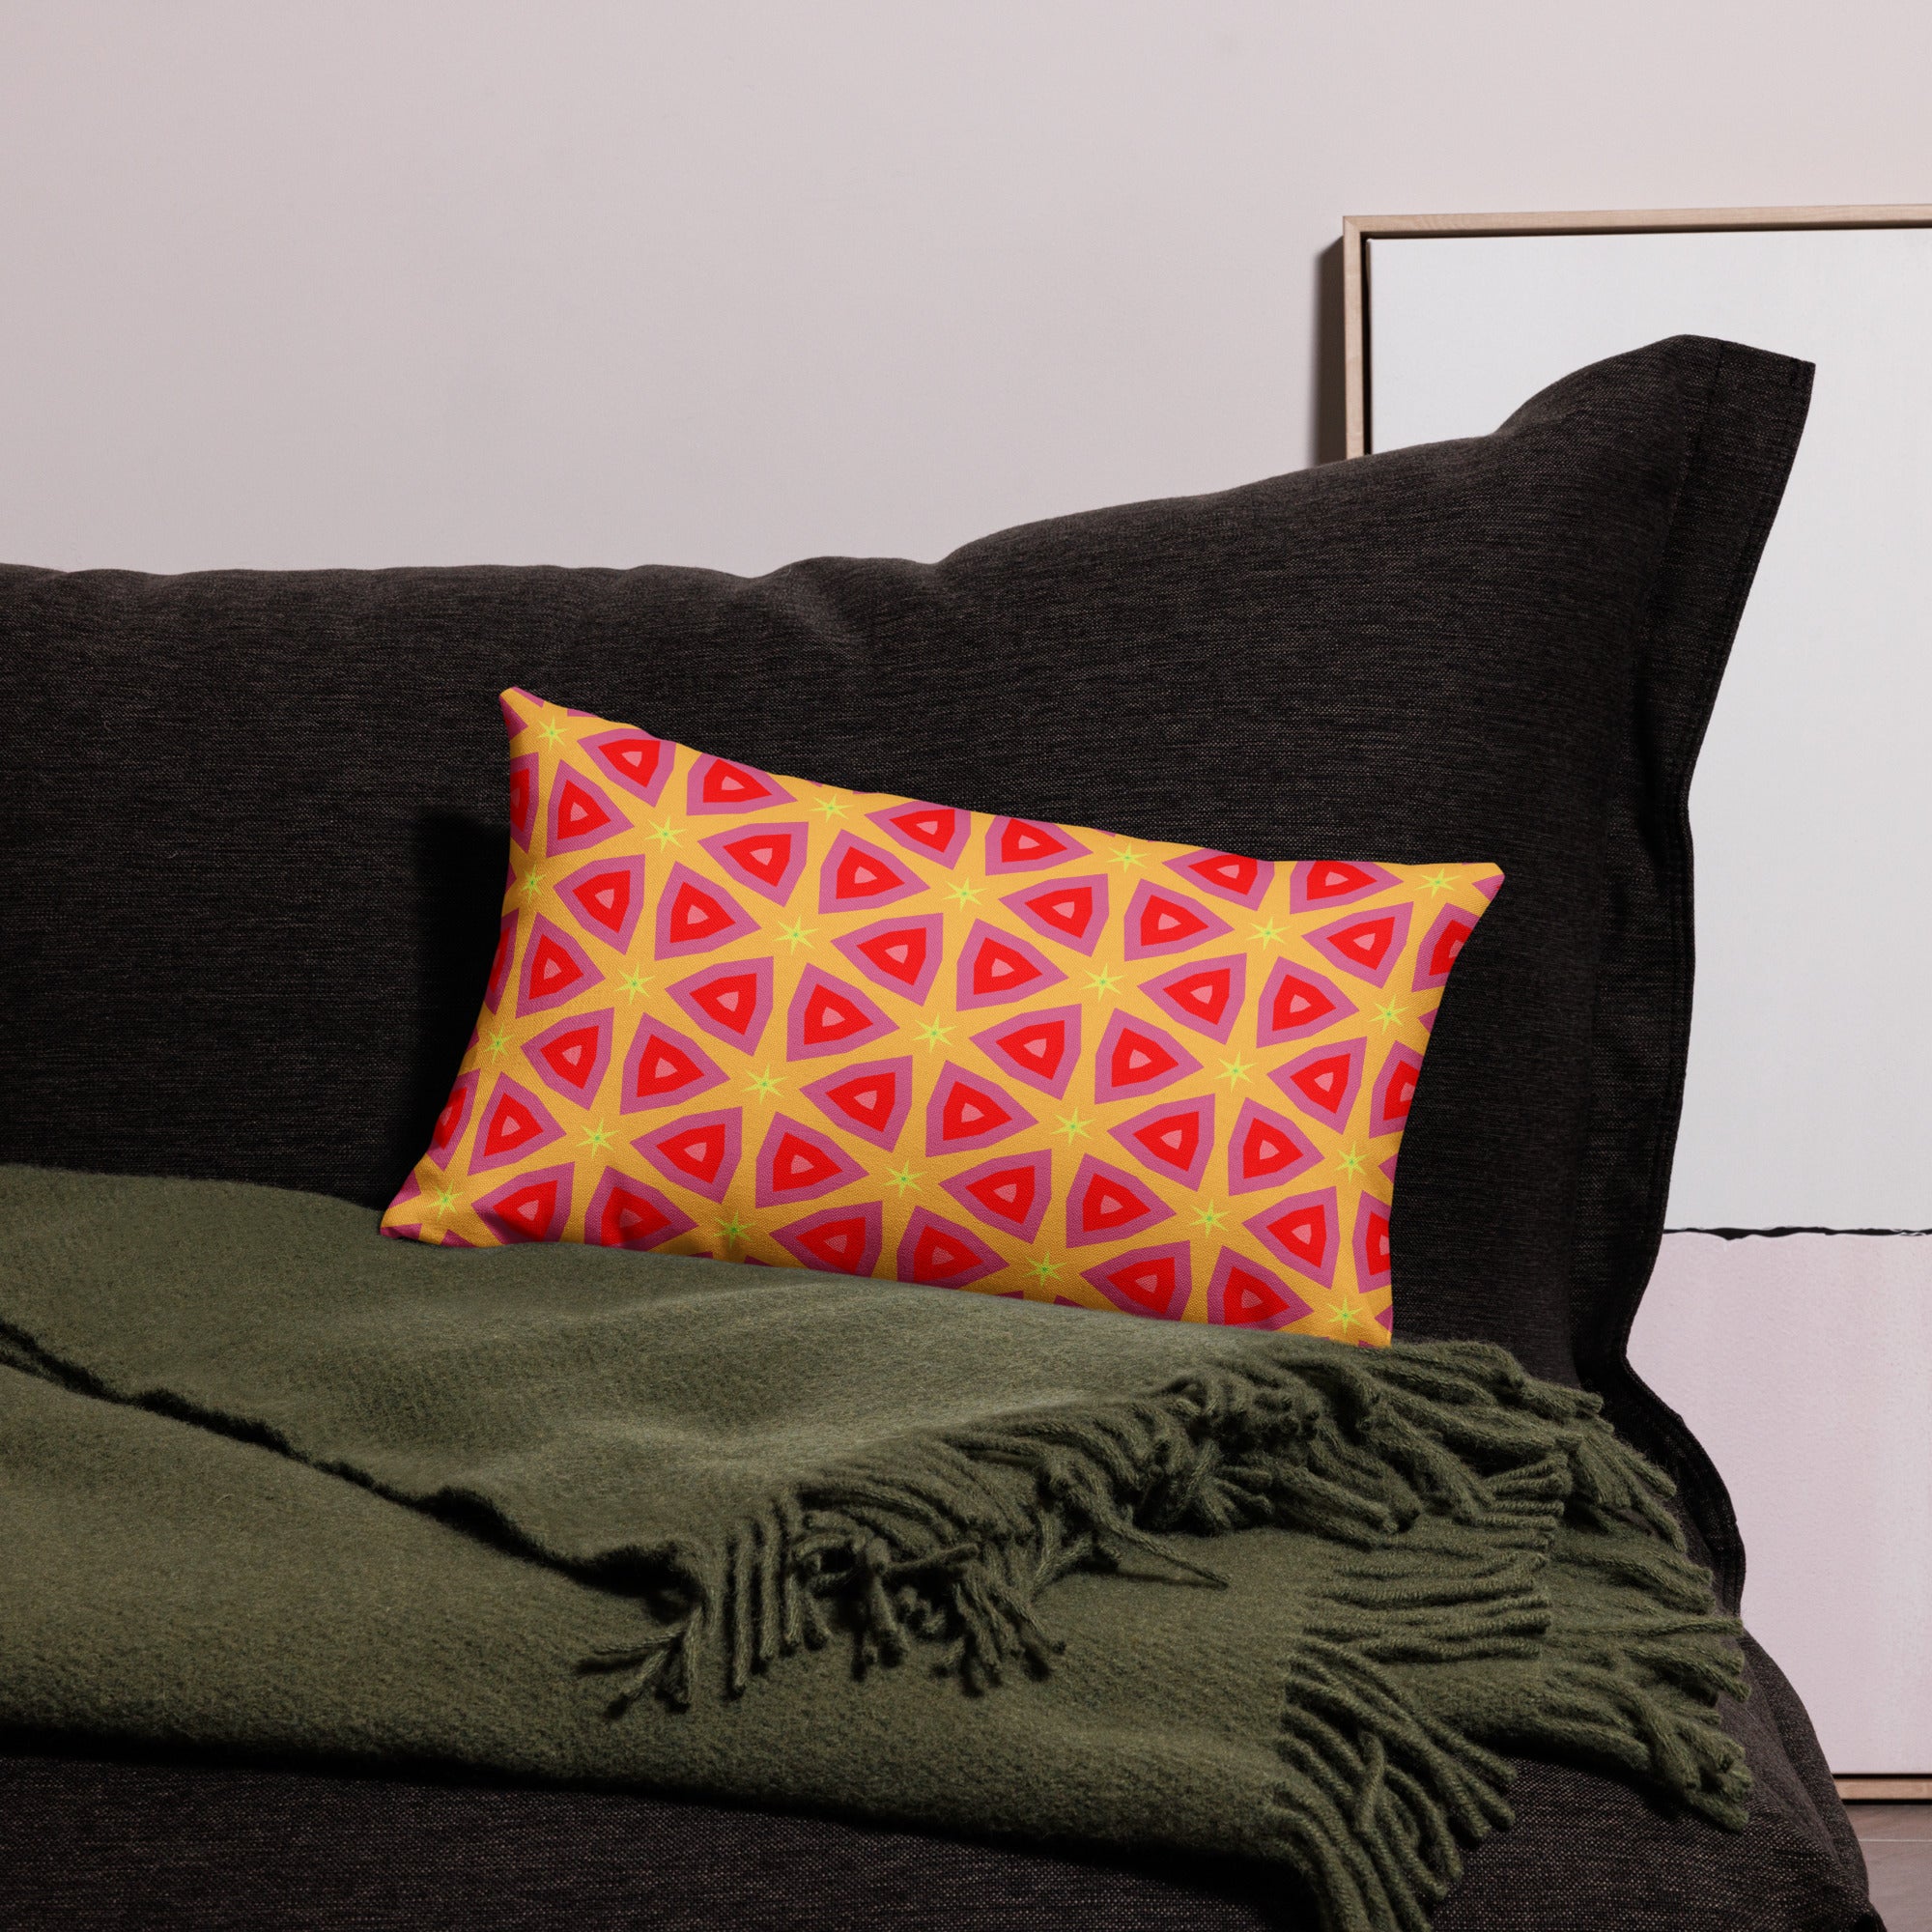 Geometric Harmony accent pillow in a contemporary living room setting.